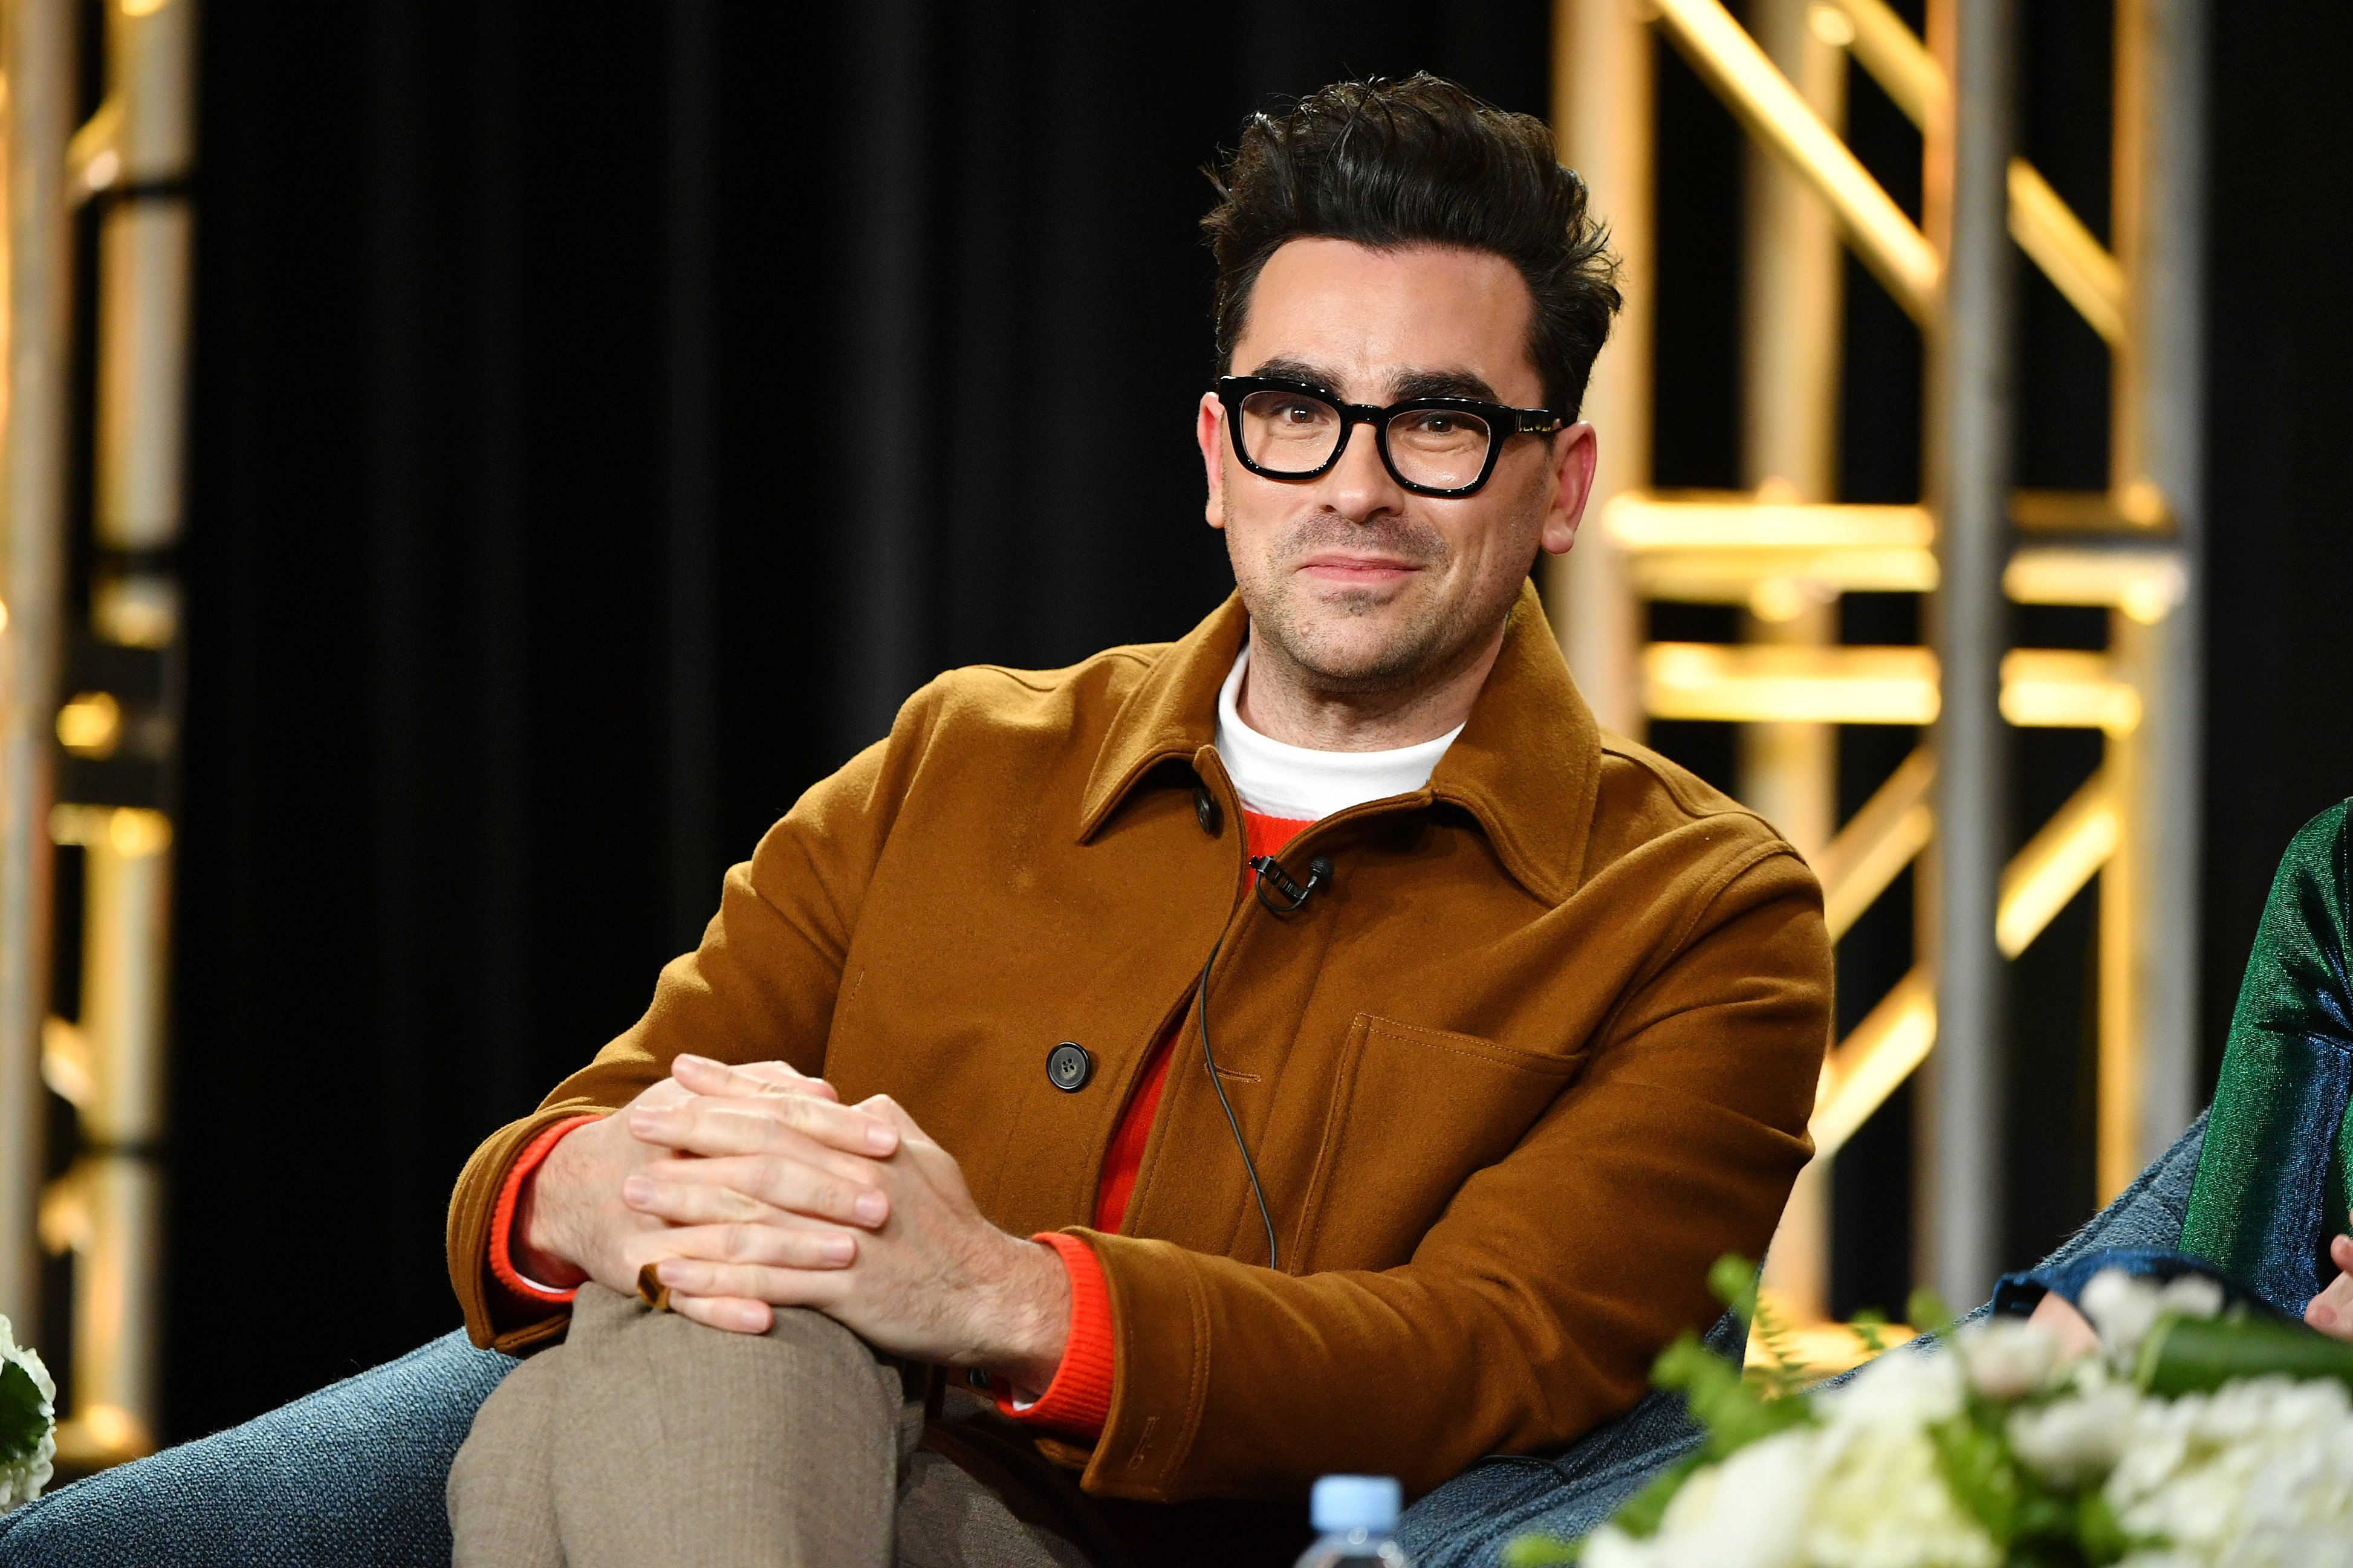 Dan Levy pictured speaking onstage at Pop TV segment of the 2020 Winter TCA Press Tour, 2020, California. | Photo: Getty Images